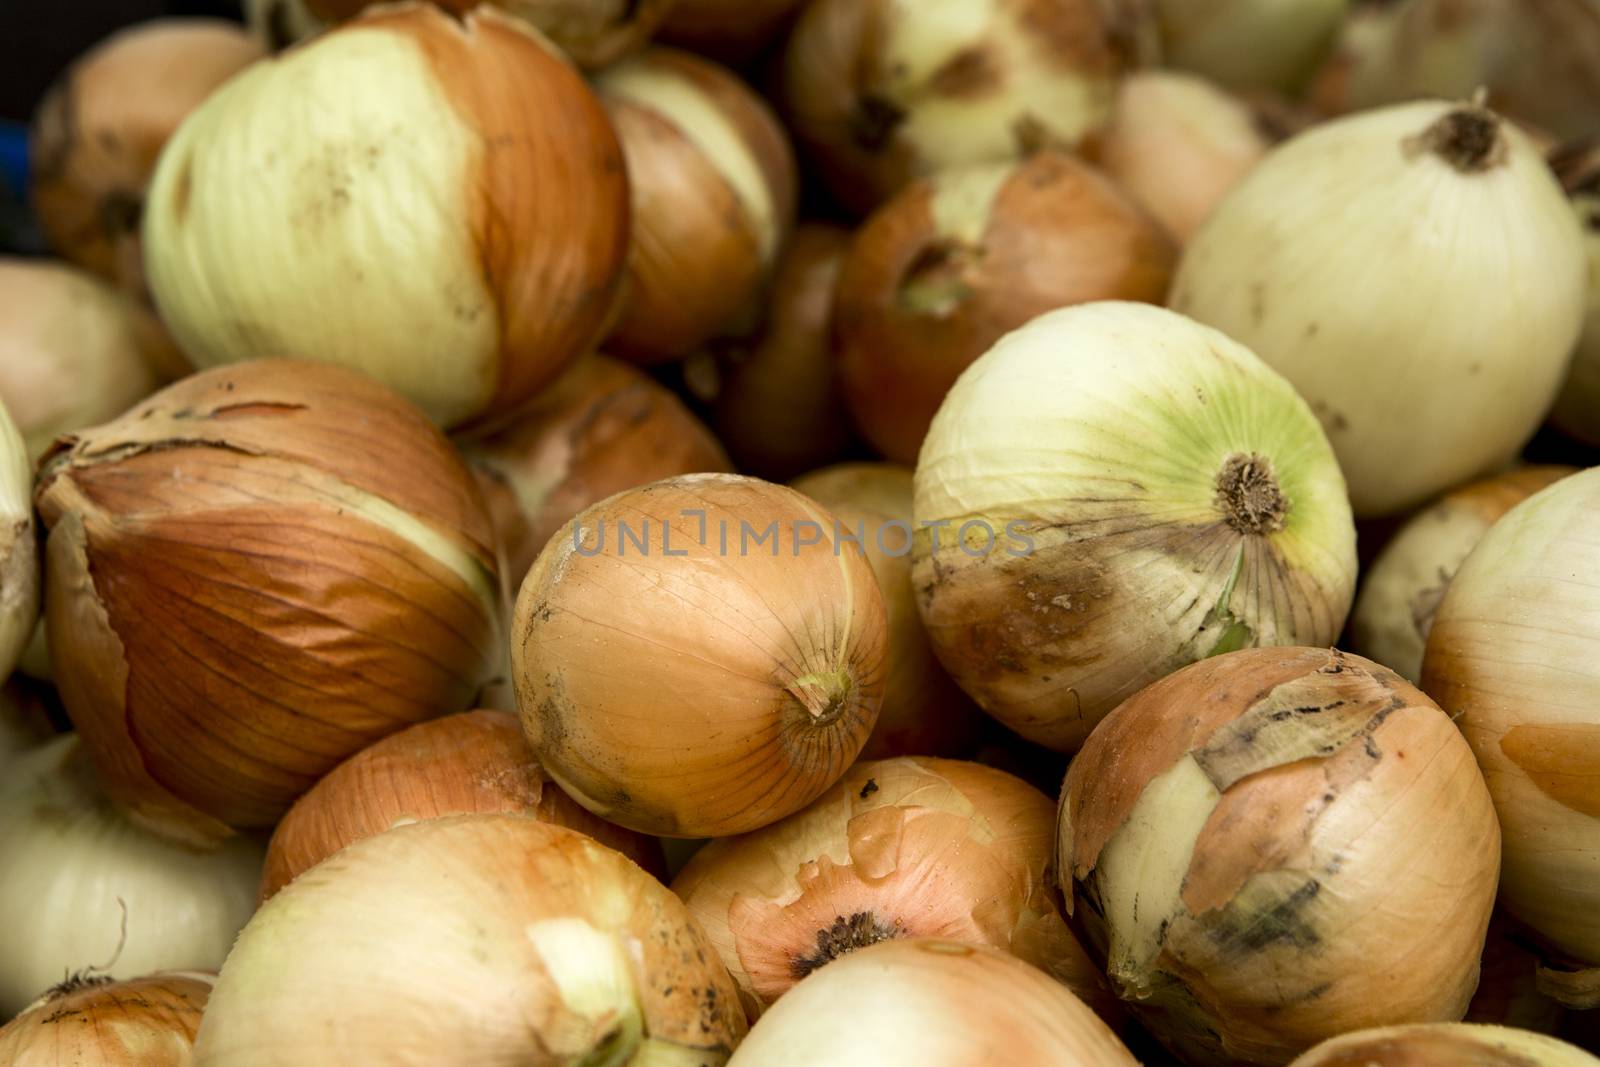 Organic onions from a local market